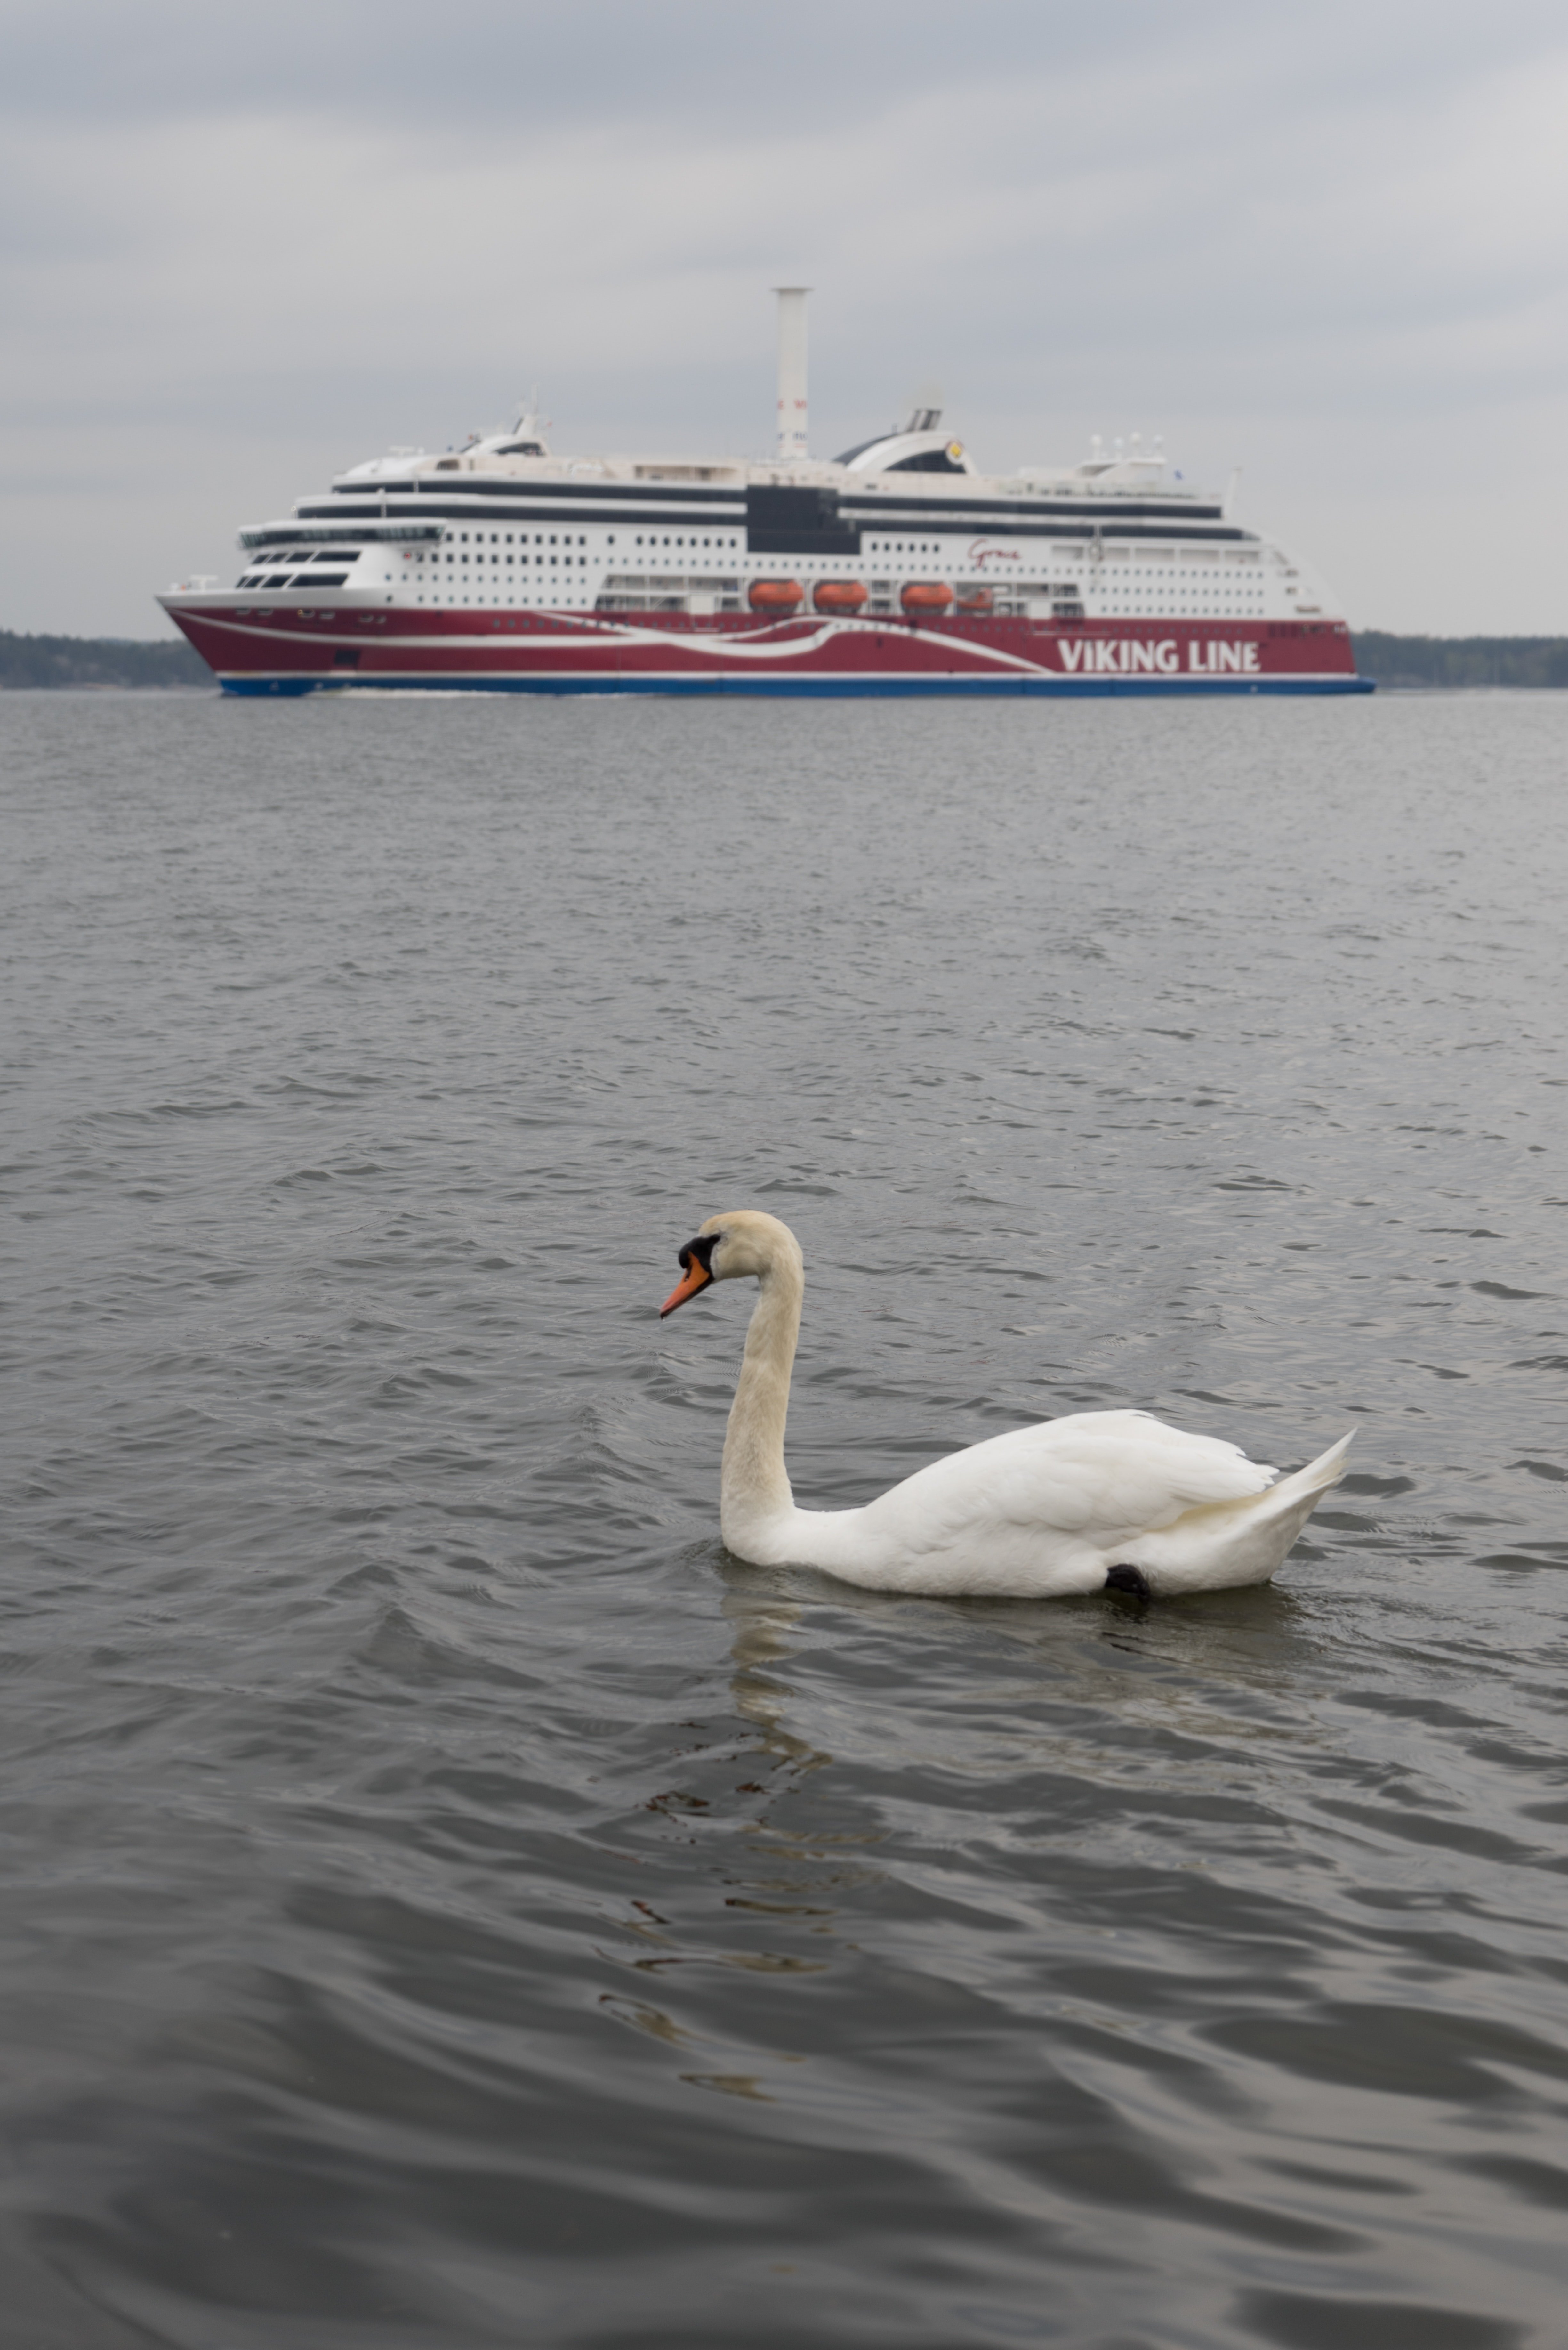 Viking line ship in Scandinavia road trips with a Swan infront.